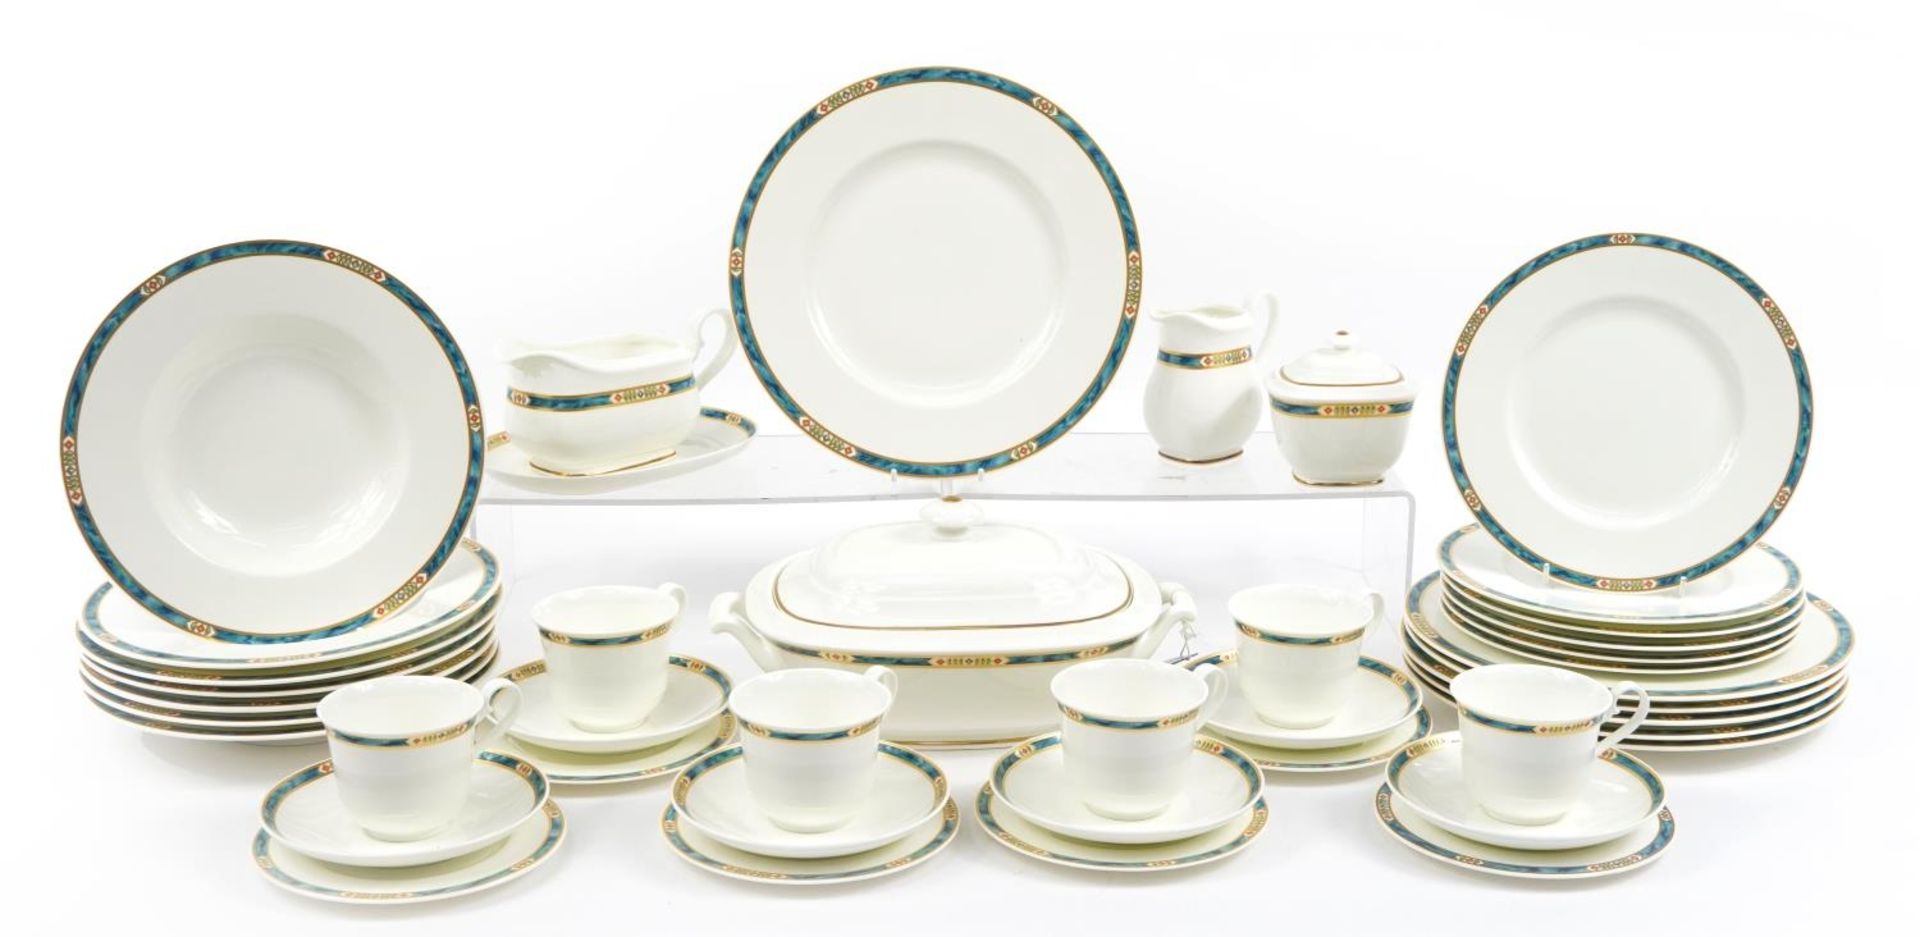 Villeroy & Boch Villa Magica dinner and teaware including lidded tureen, plates and cups with